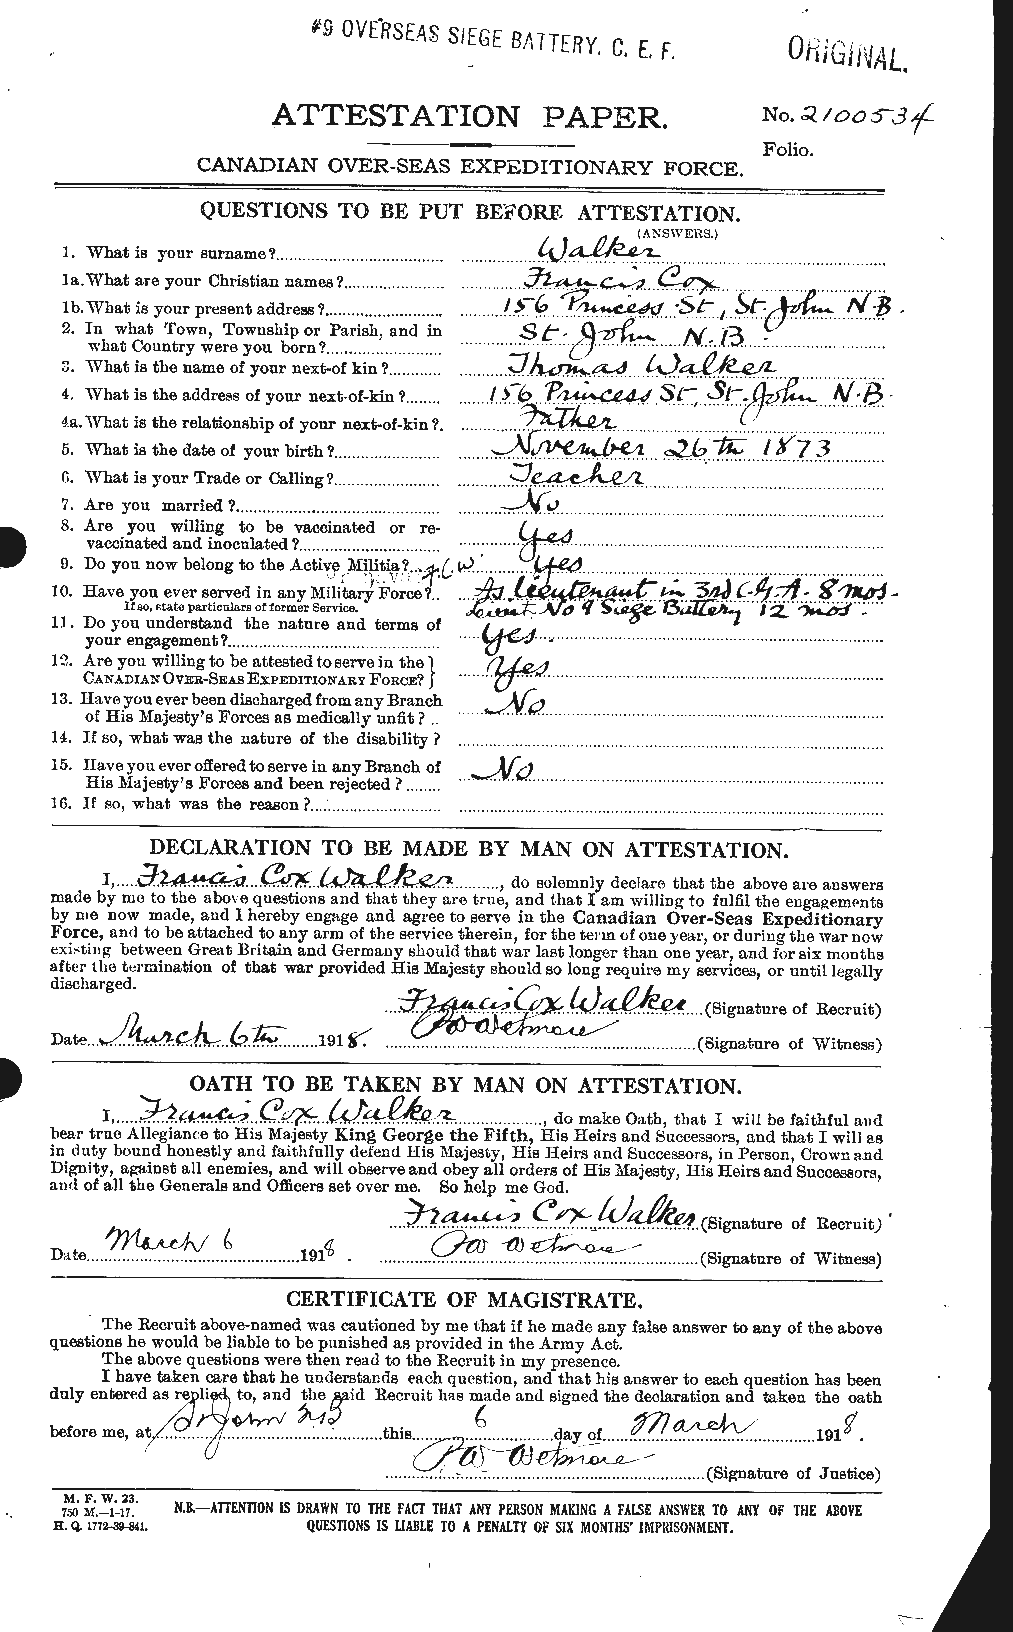 Personnel Records of the First World War - CEF 651835a